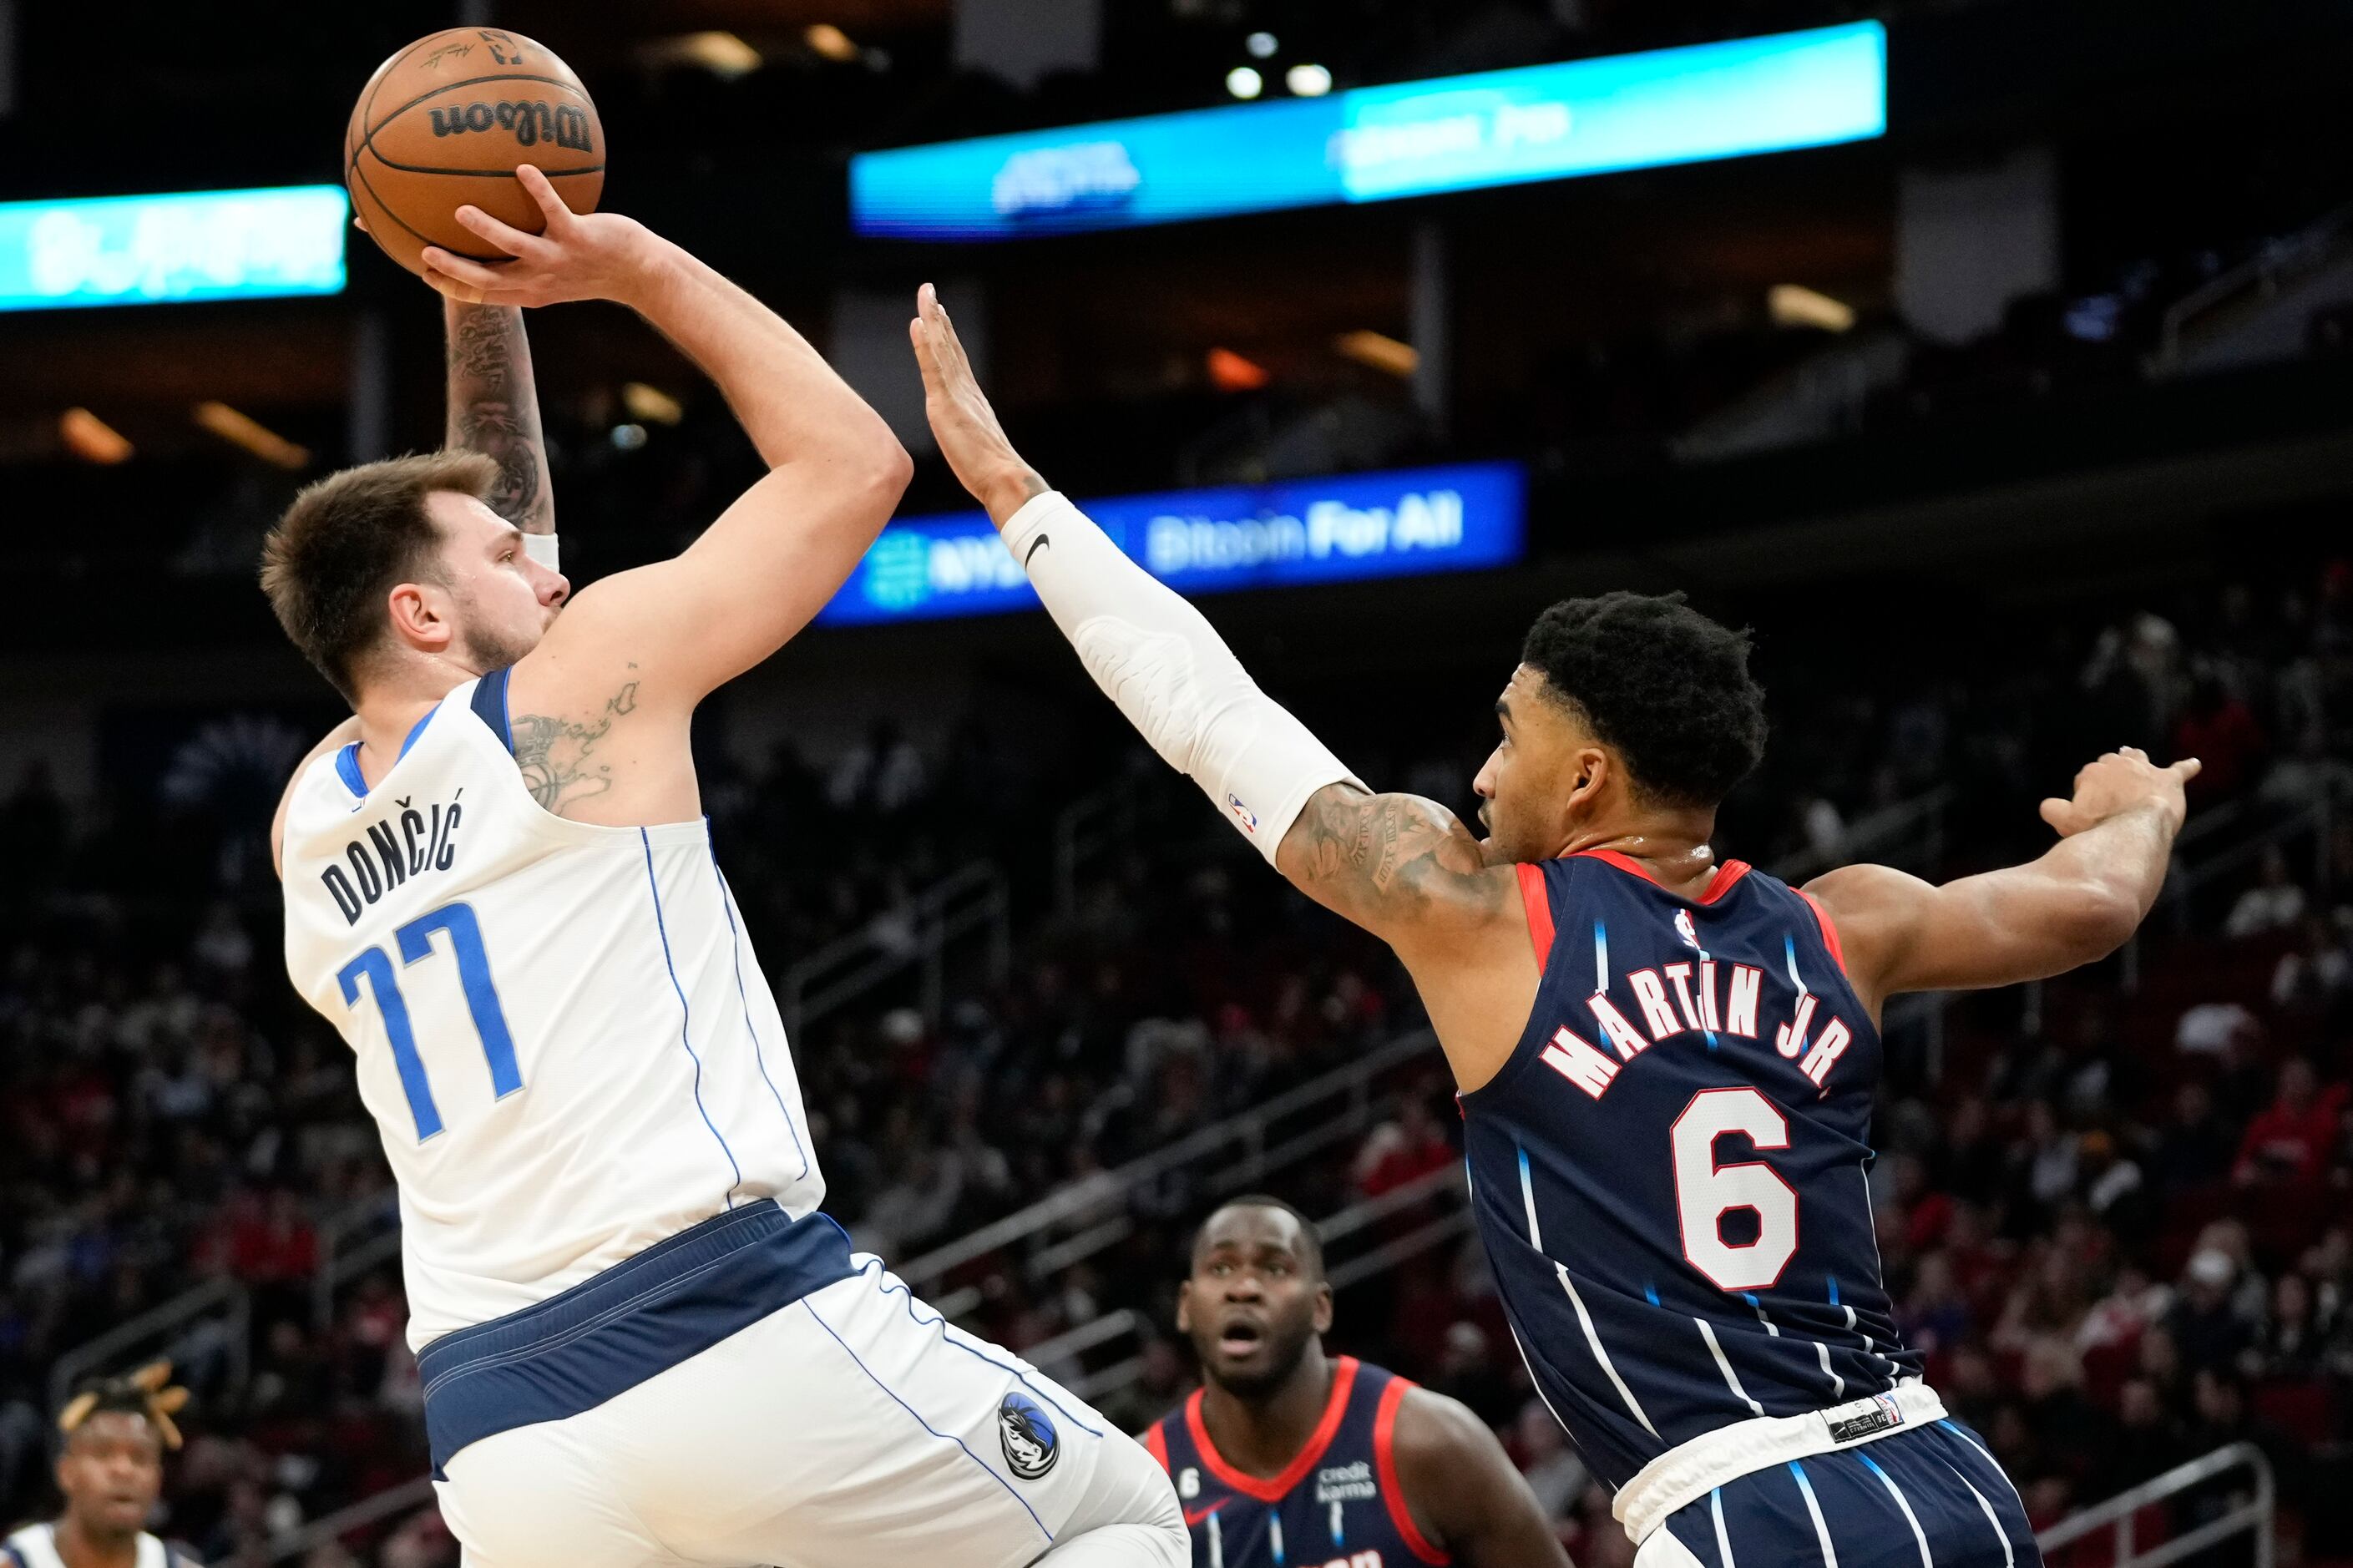 After Luka Doncic's 'hot' 50 points vs. Rockets, worry about Mavs'  supporting cast remains